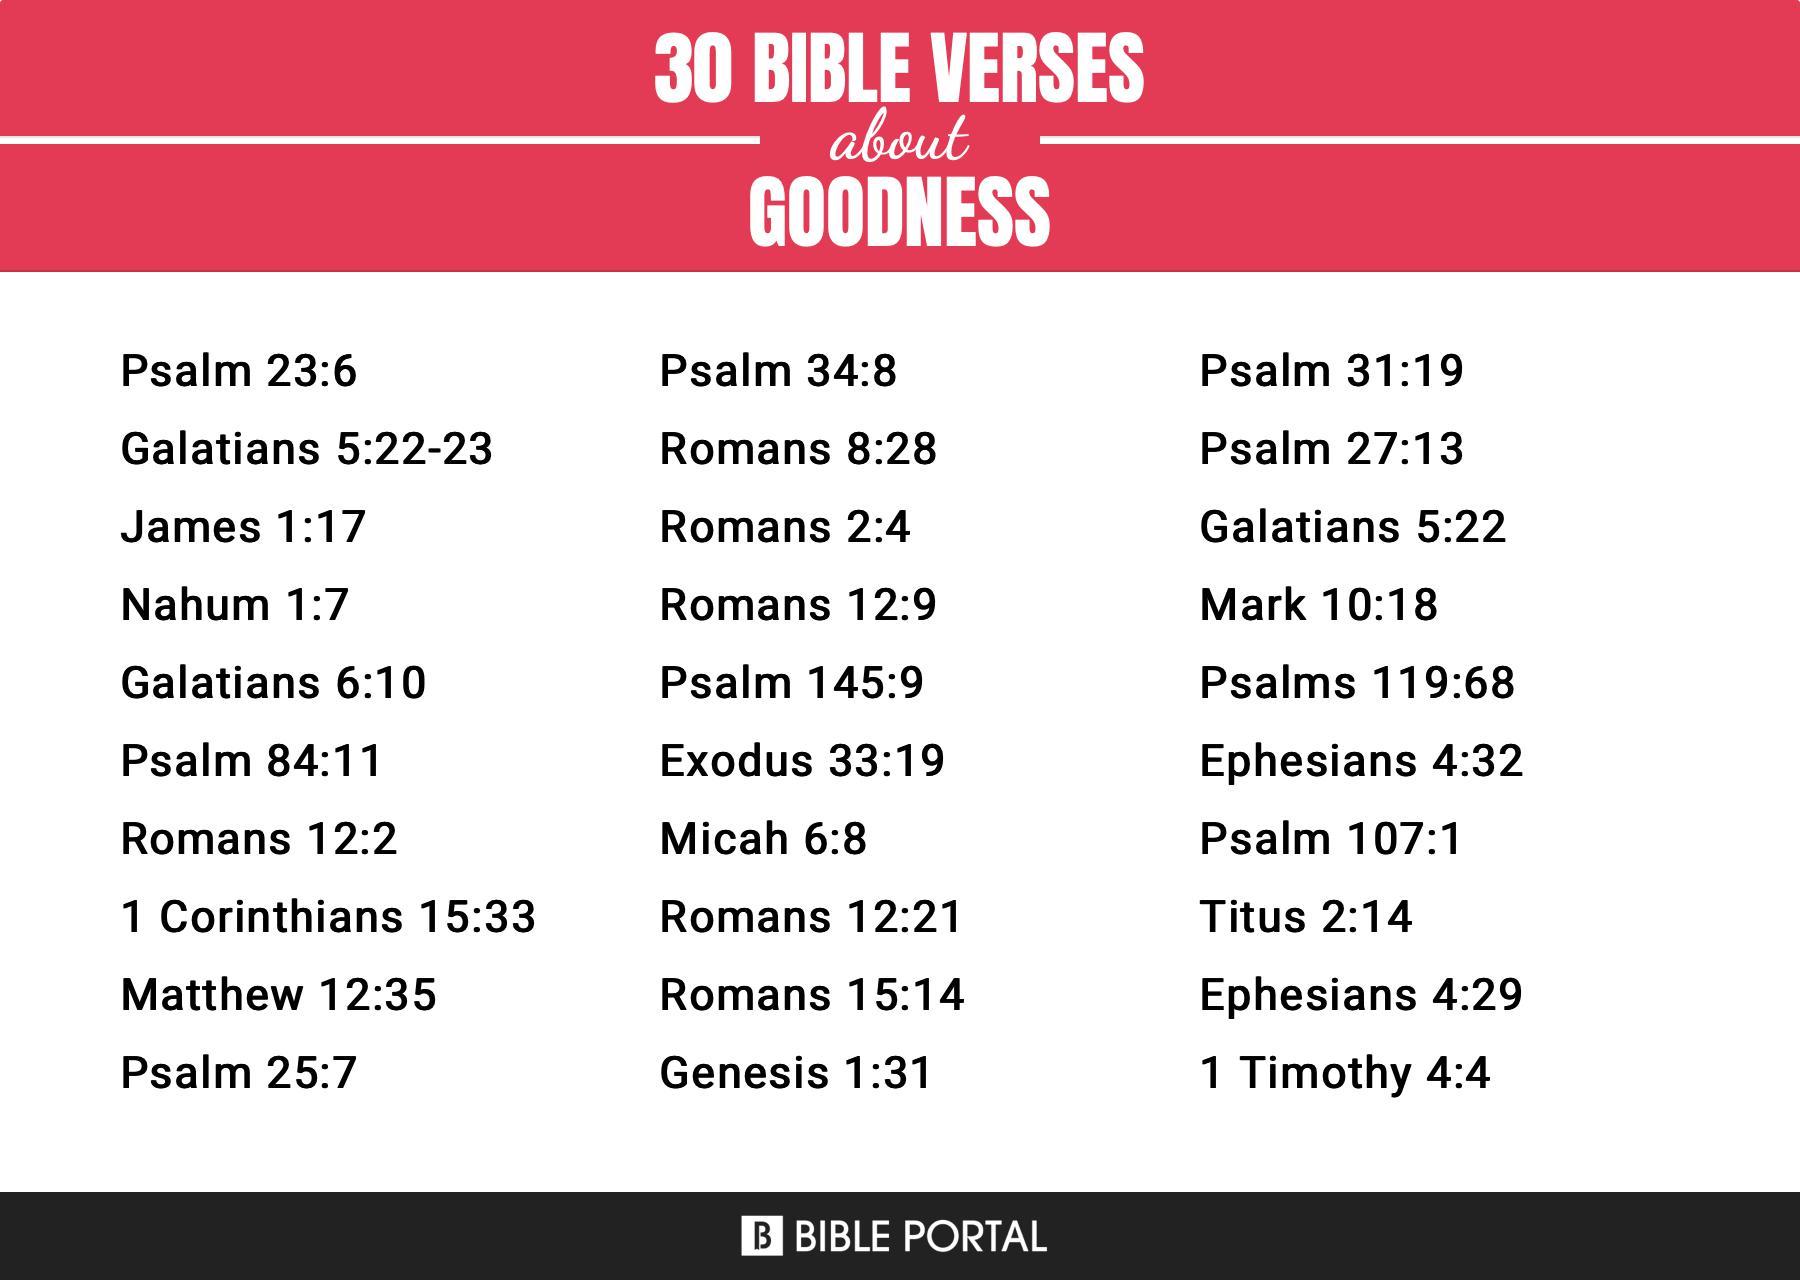 What Does the Bible Say about Goodness?